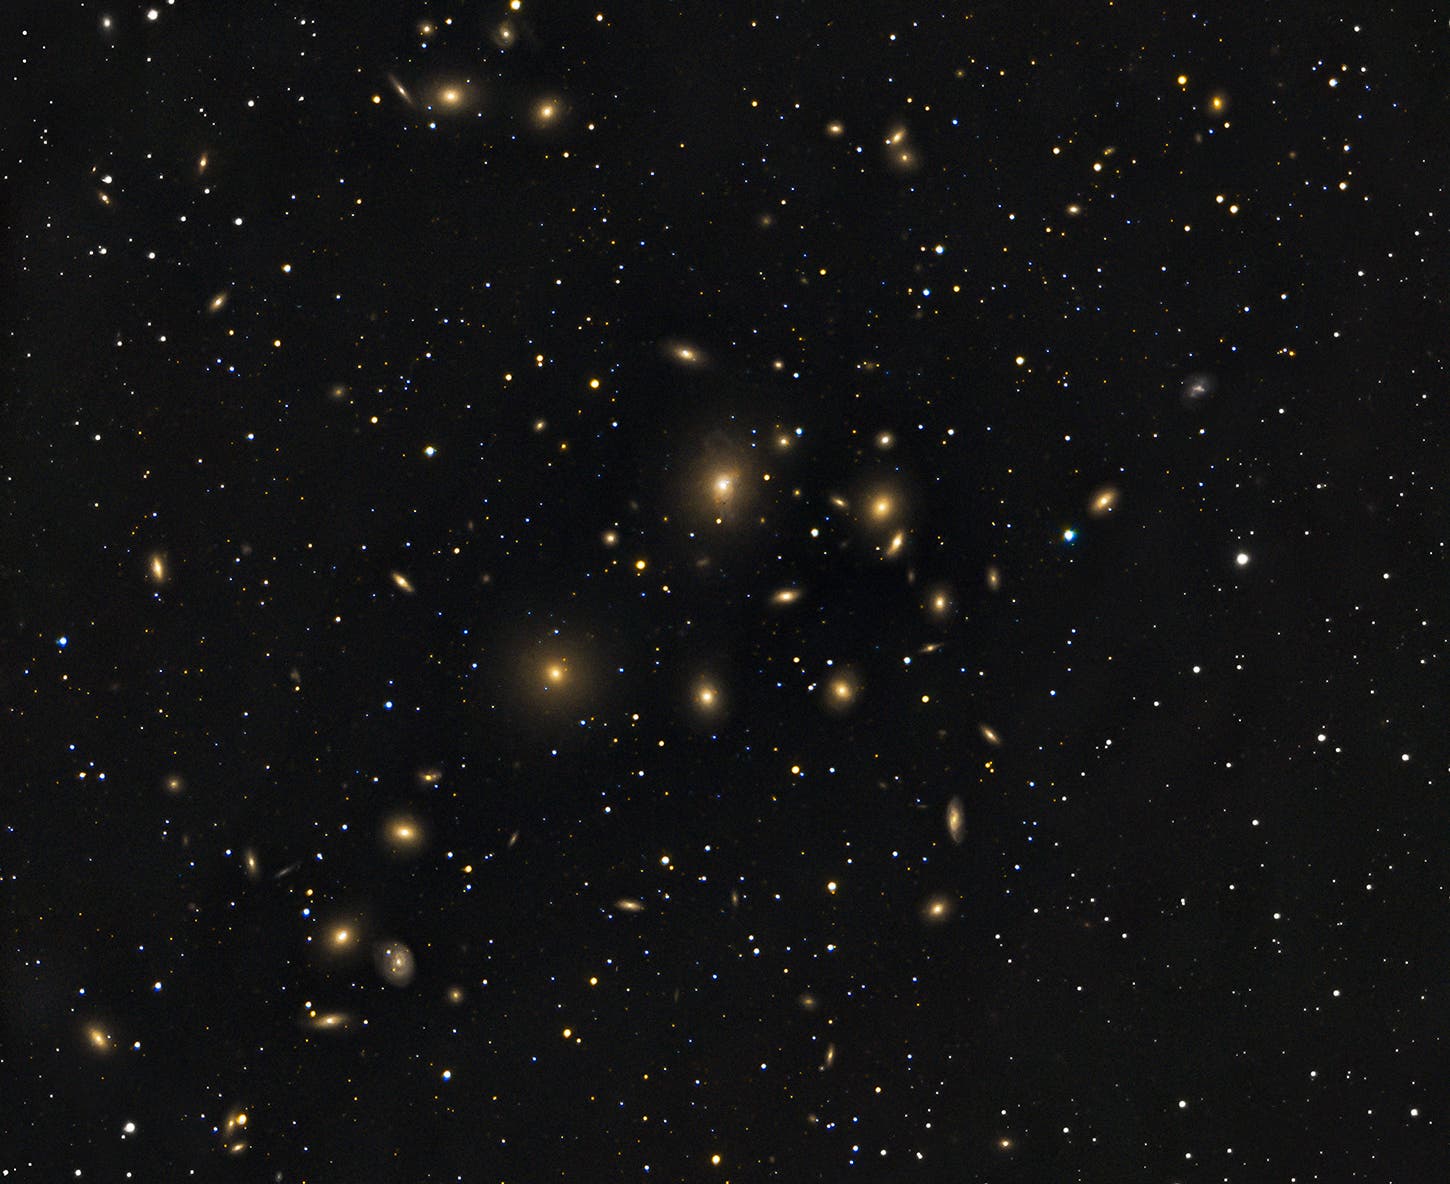 Abell 426 Perseus galaxy cluster